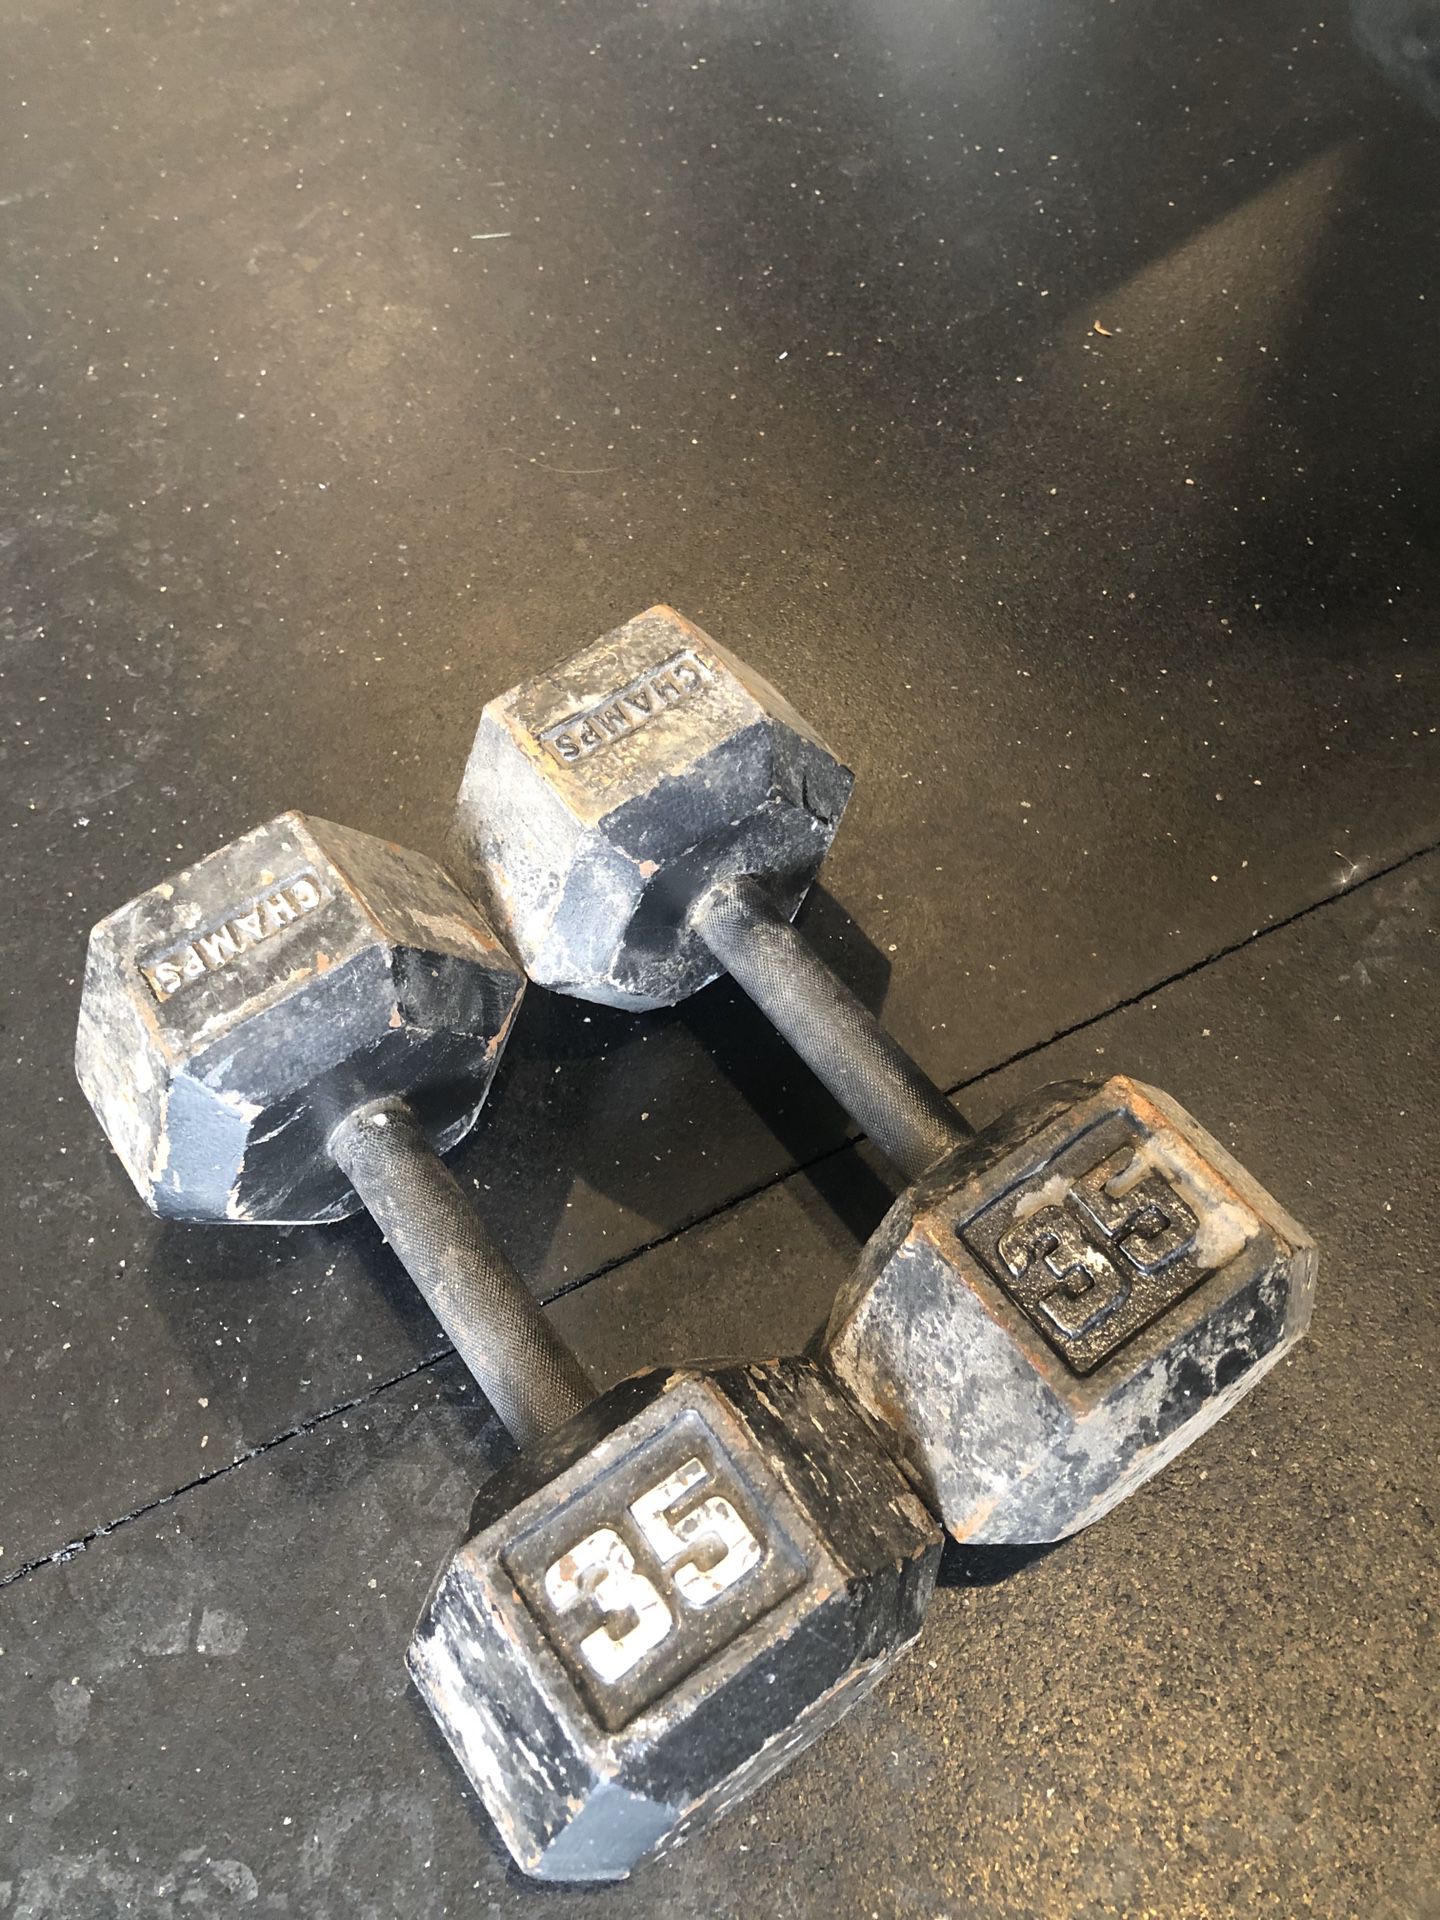 Pair of 35 lbs Hex Dumbbells $80 (Firm)or trade for one 75lb hex dumbbell